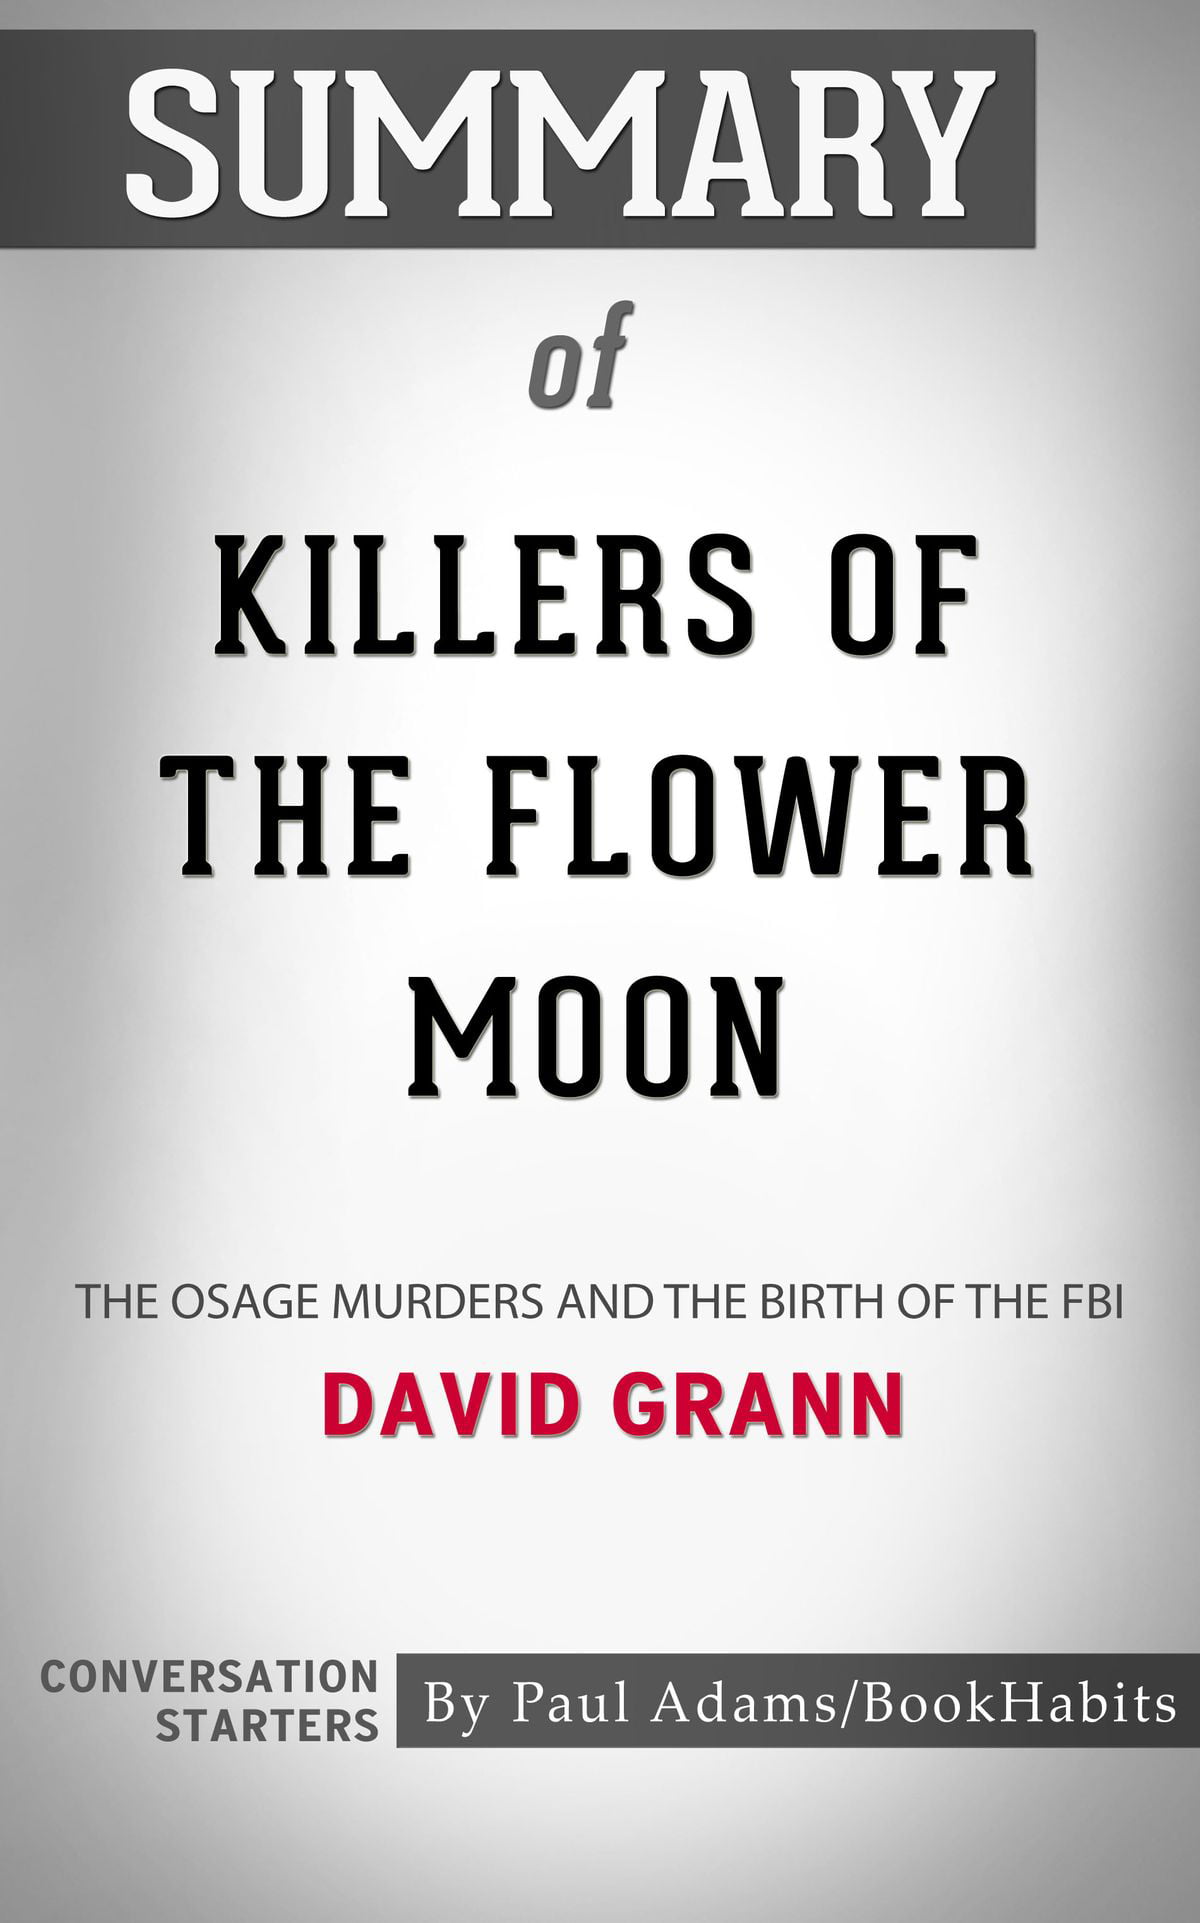 thesis for killers of the flower moon